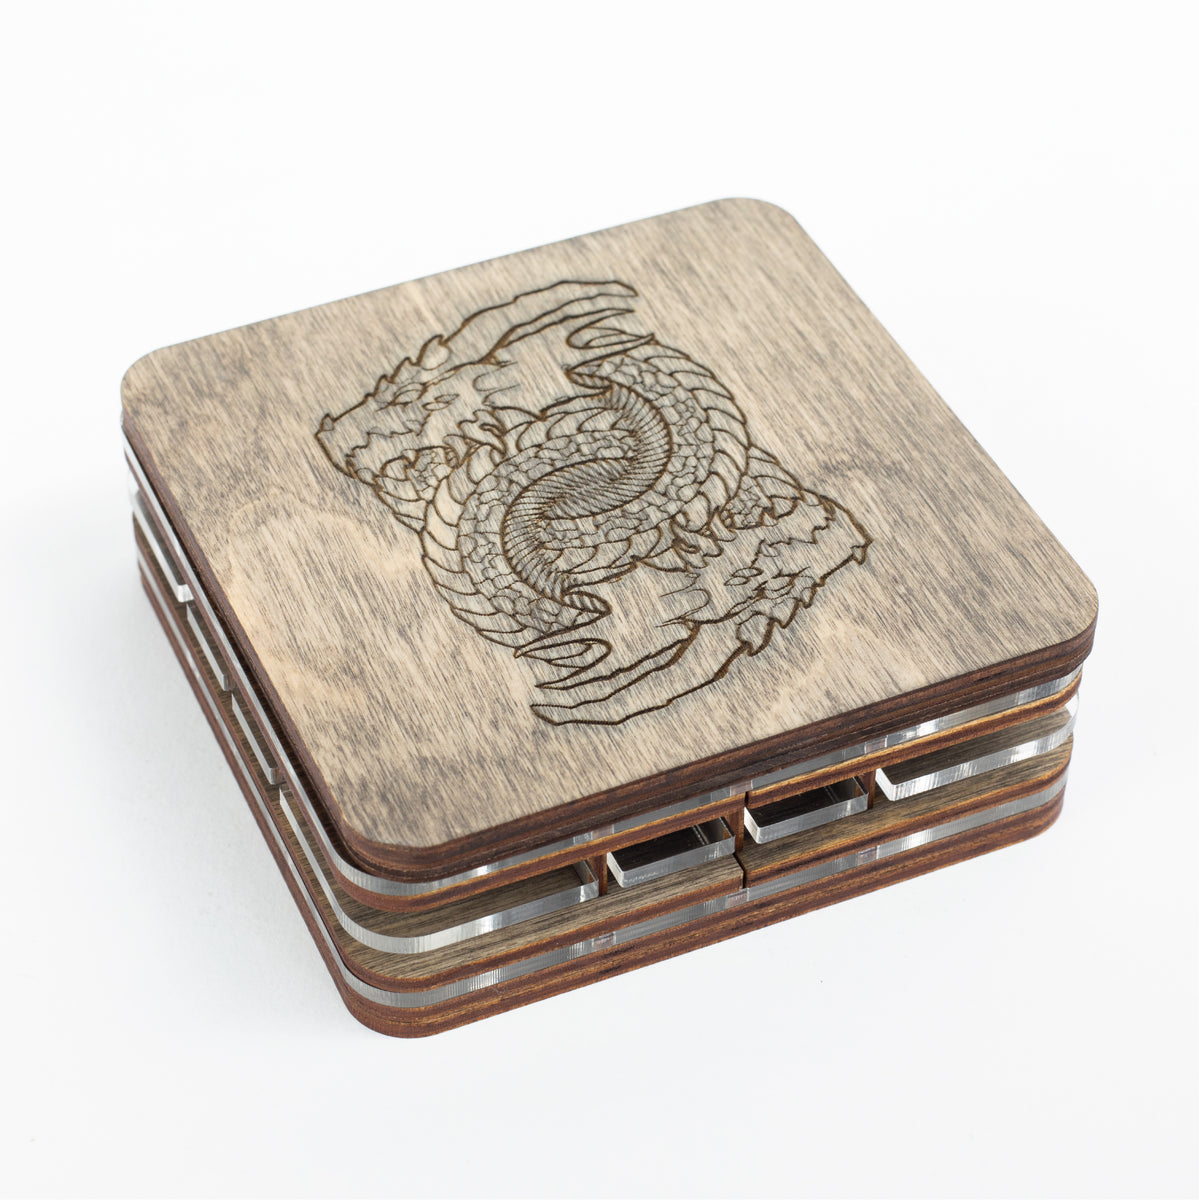 Dice Box for Dungeons and Dragons and Other Roleplaying Games